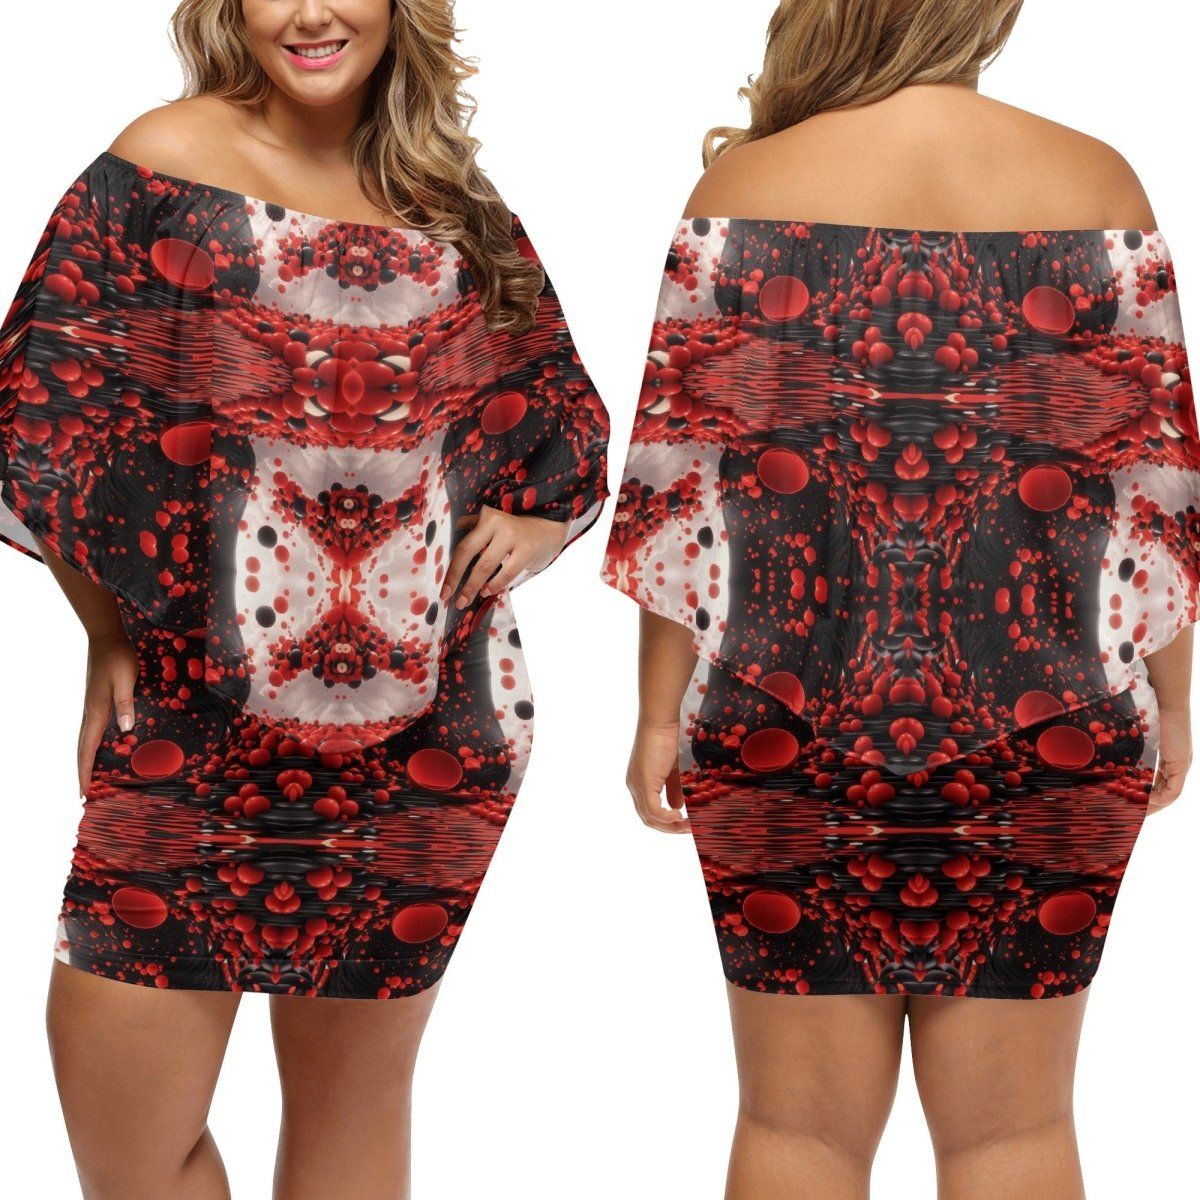 Stylish Red Off the Shoulder Wrap Dress - Perfect for Any Occasion - Iron Phoenix GHG